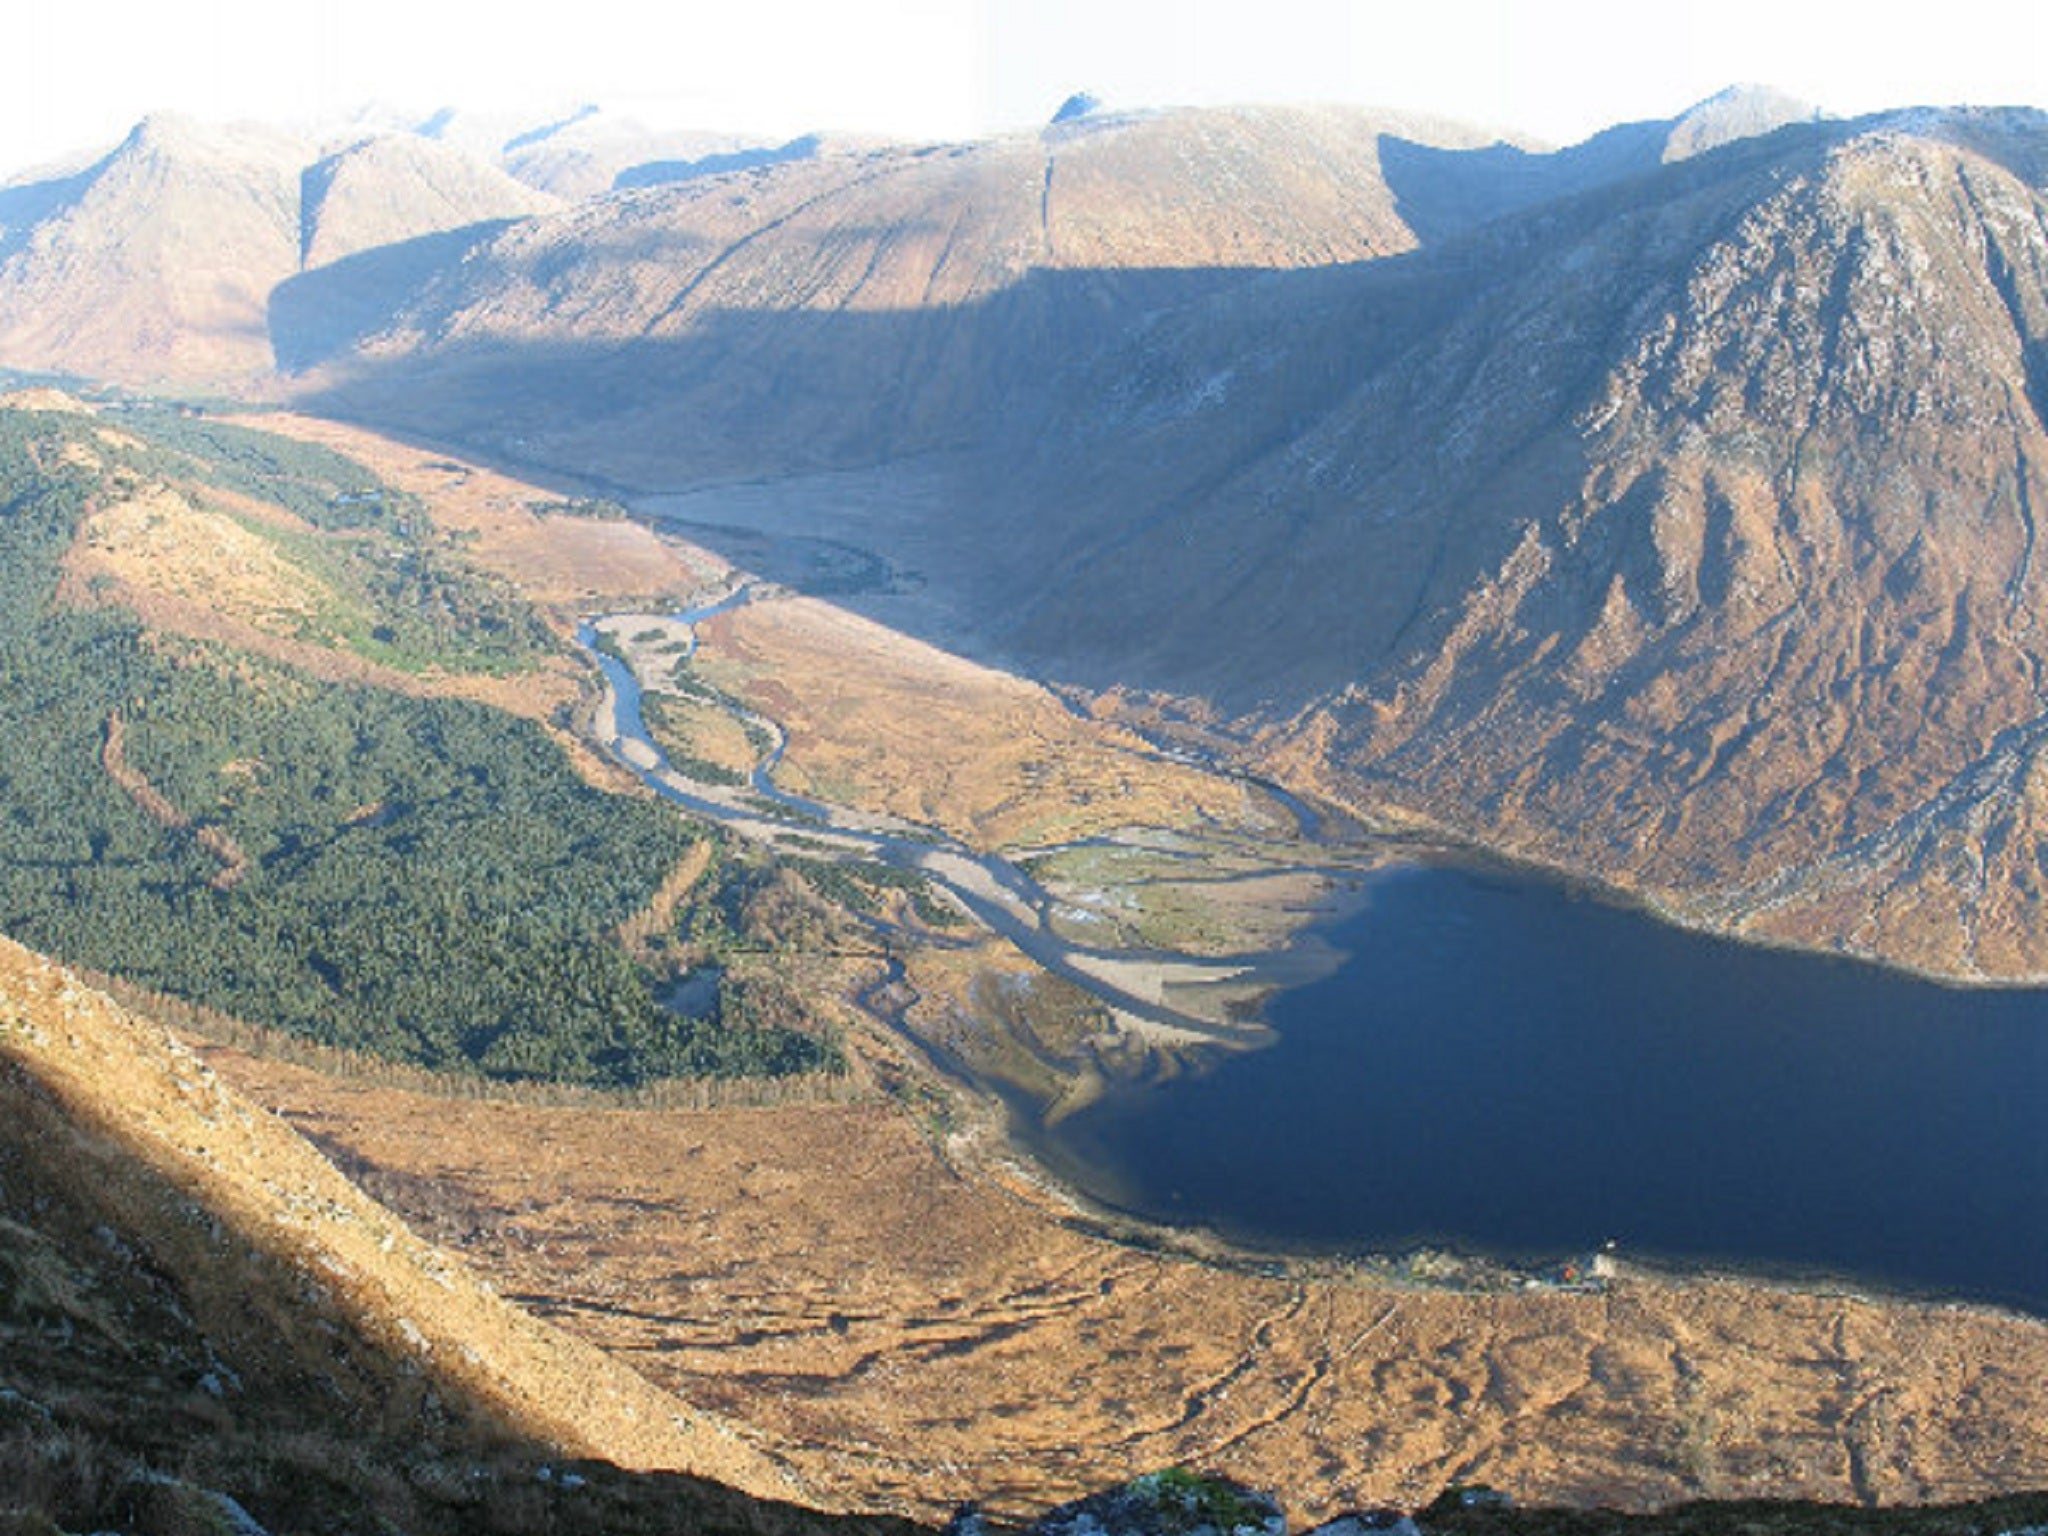 Loch Etive, in Argyll, near to where the light aircraft carrying two people crashed on 4 April 2015